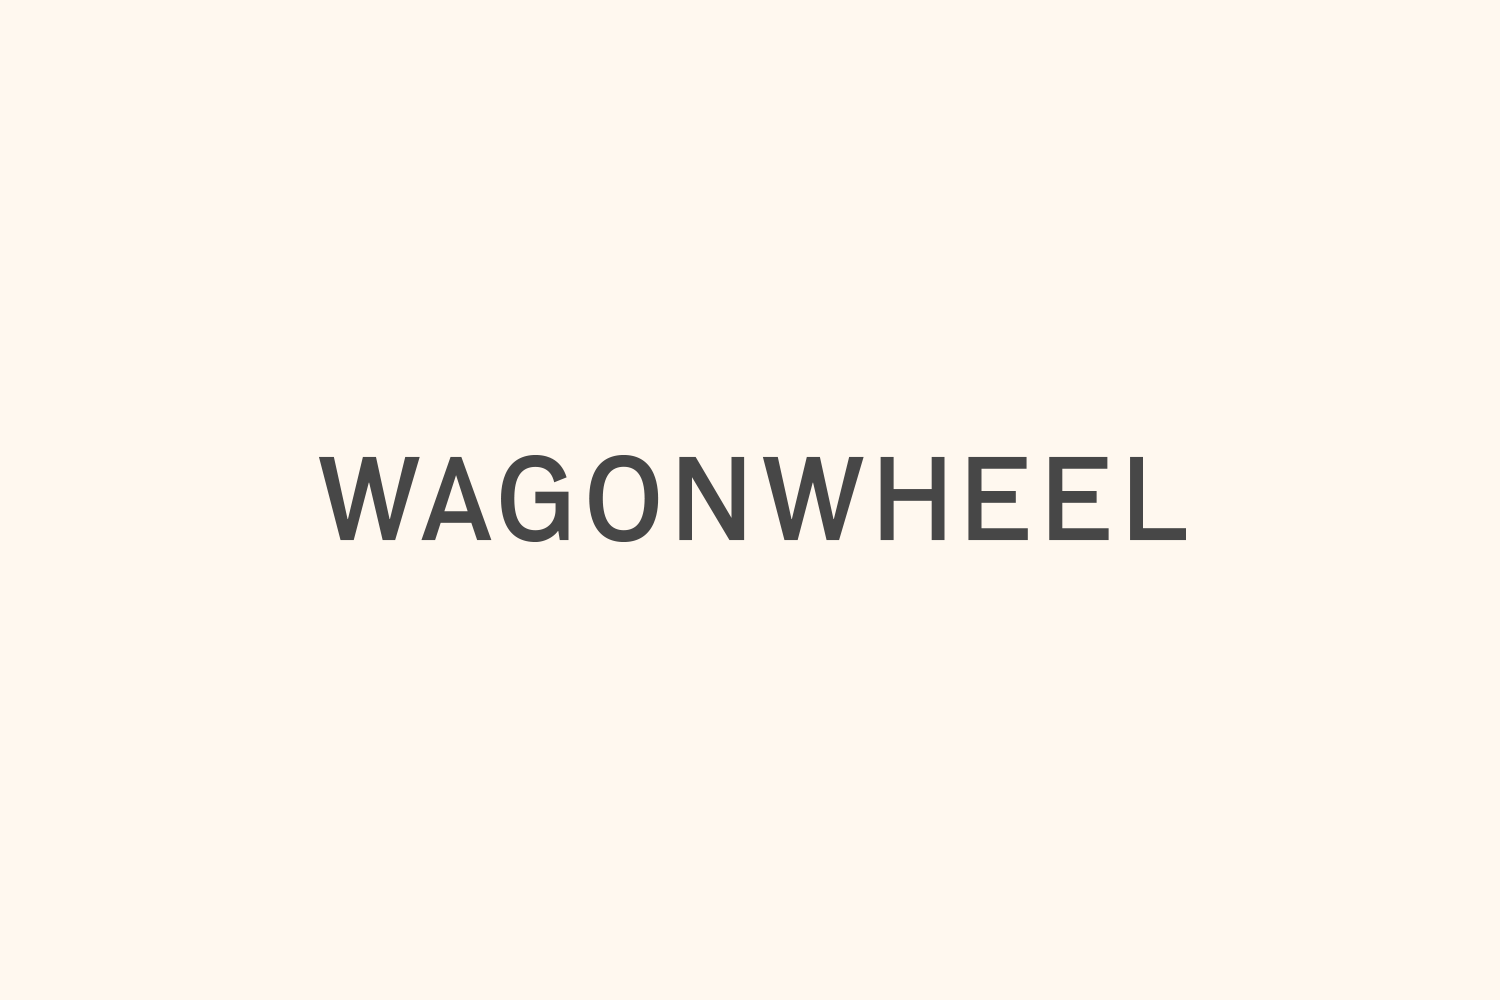 Logotype for Nashville-based boutique real estate title and escrow company Wagon Wheel designed by Perky Bros.